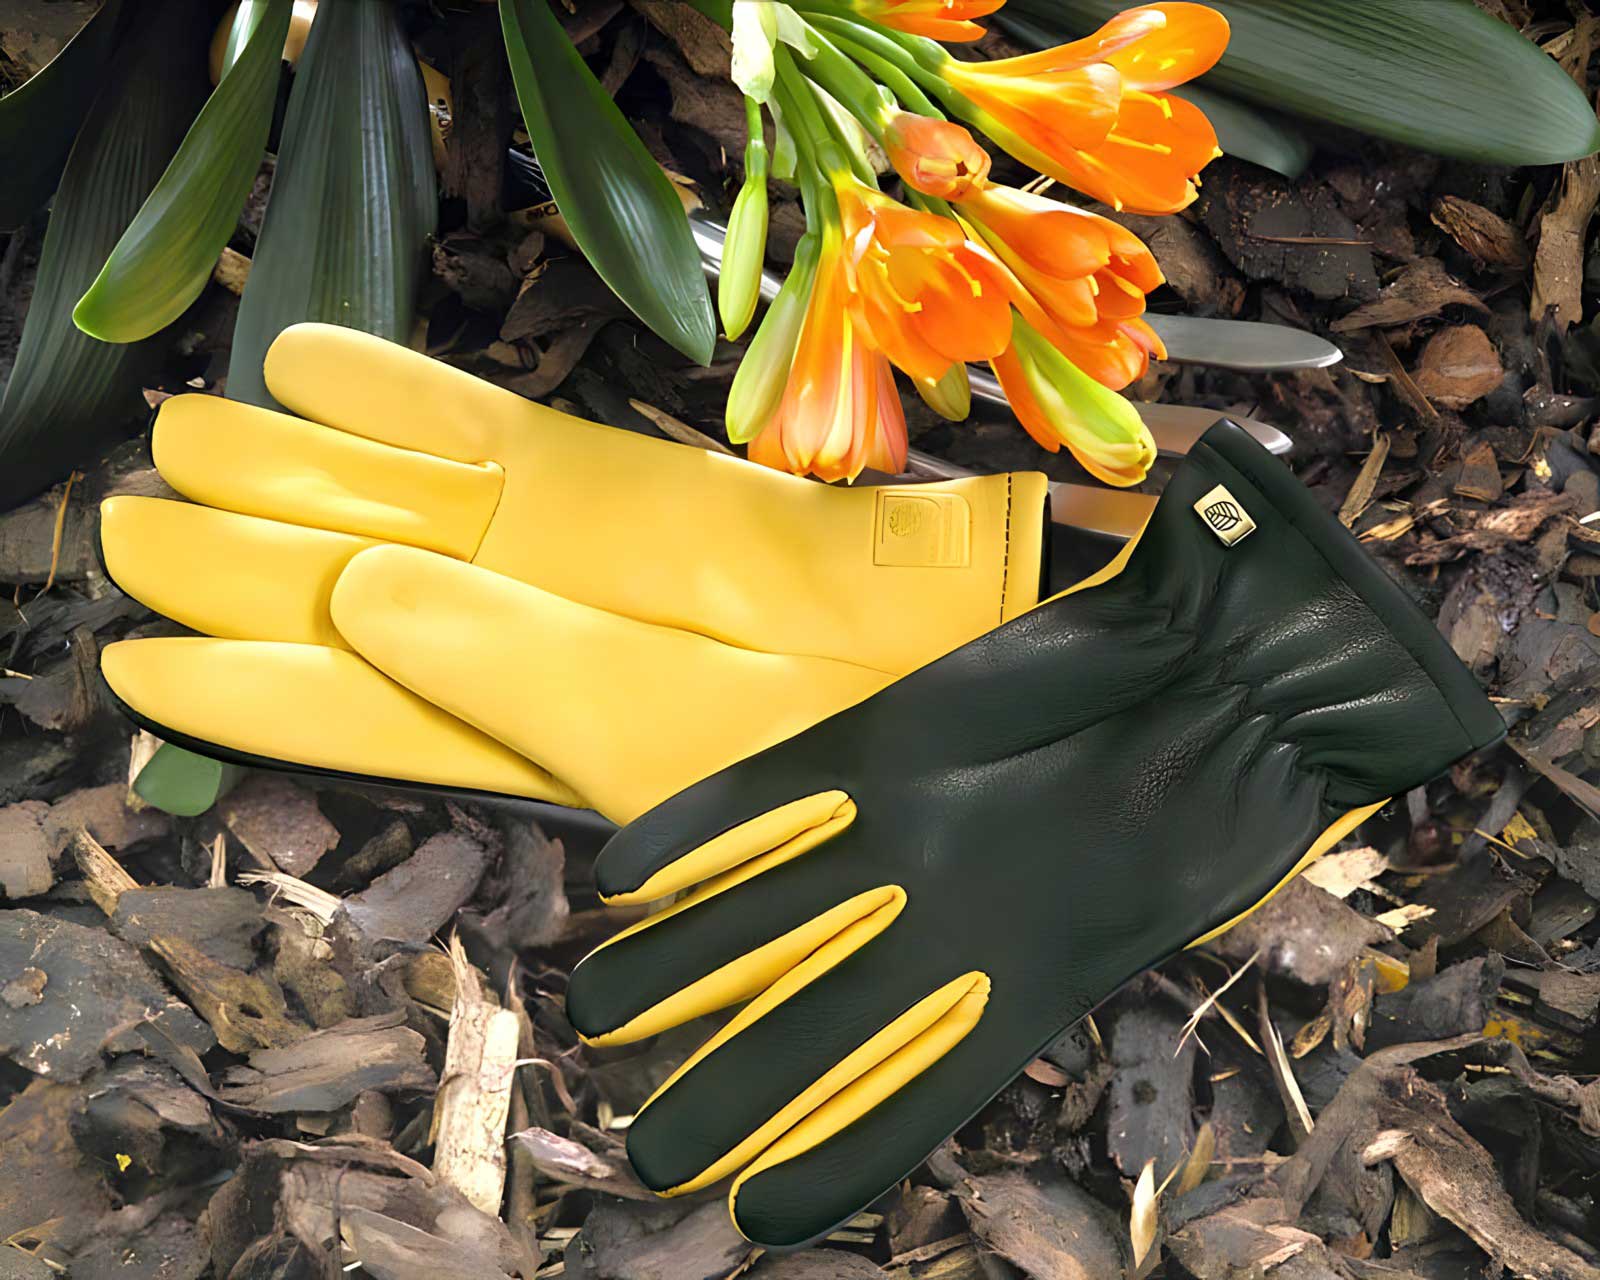 Dry touch gloves - the best you can buy, very durable and extremely comfortable